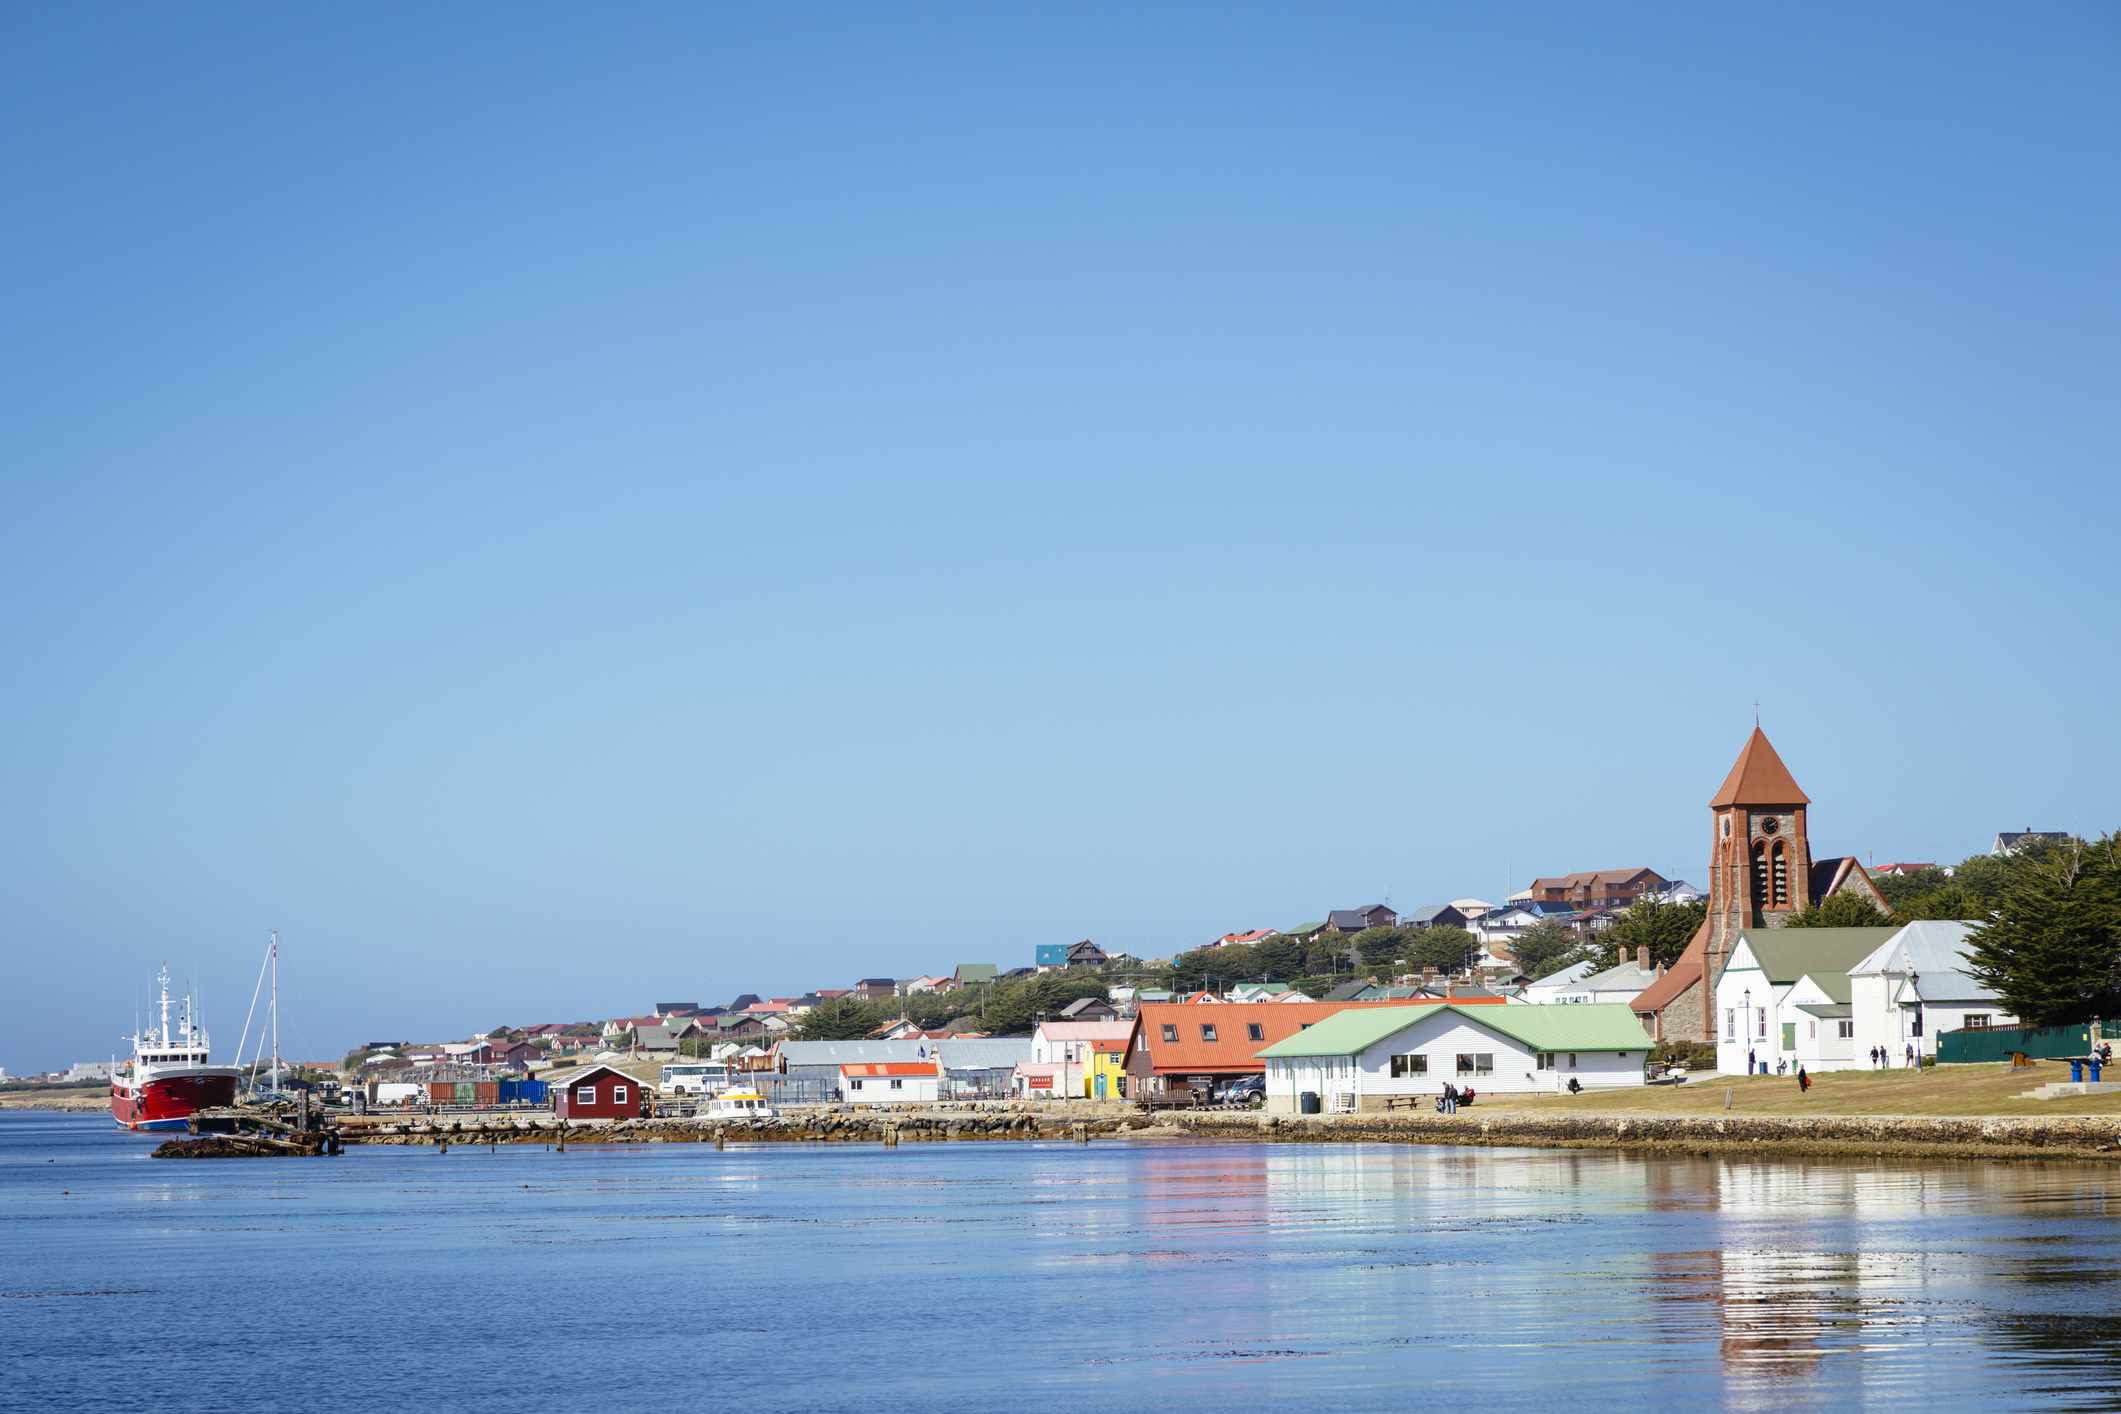 The waterfront at Stanley, the capital of the Falkland Islands. (Andrew Peacock – Getty Images)